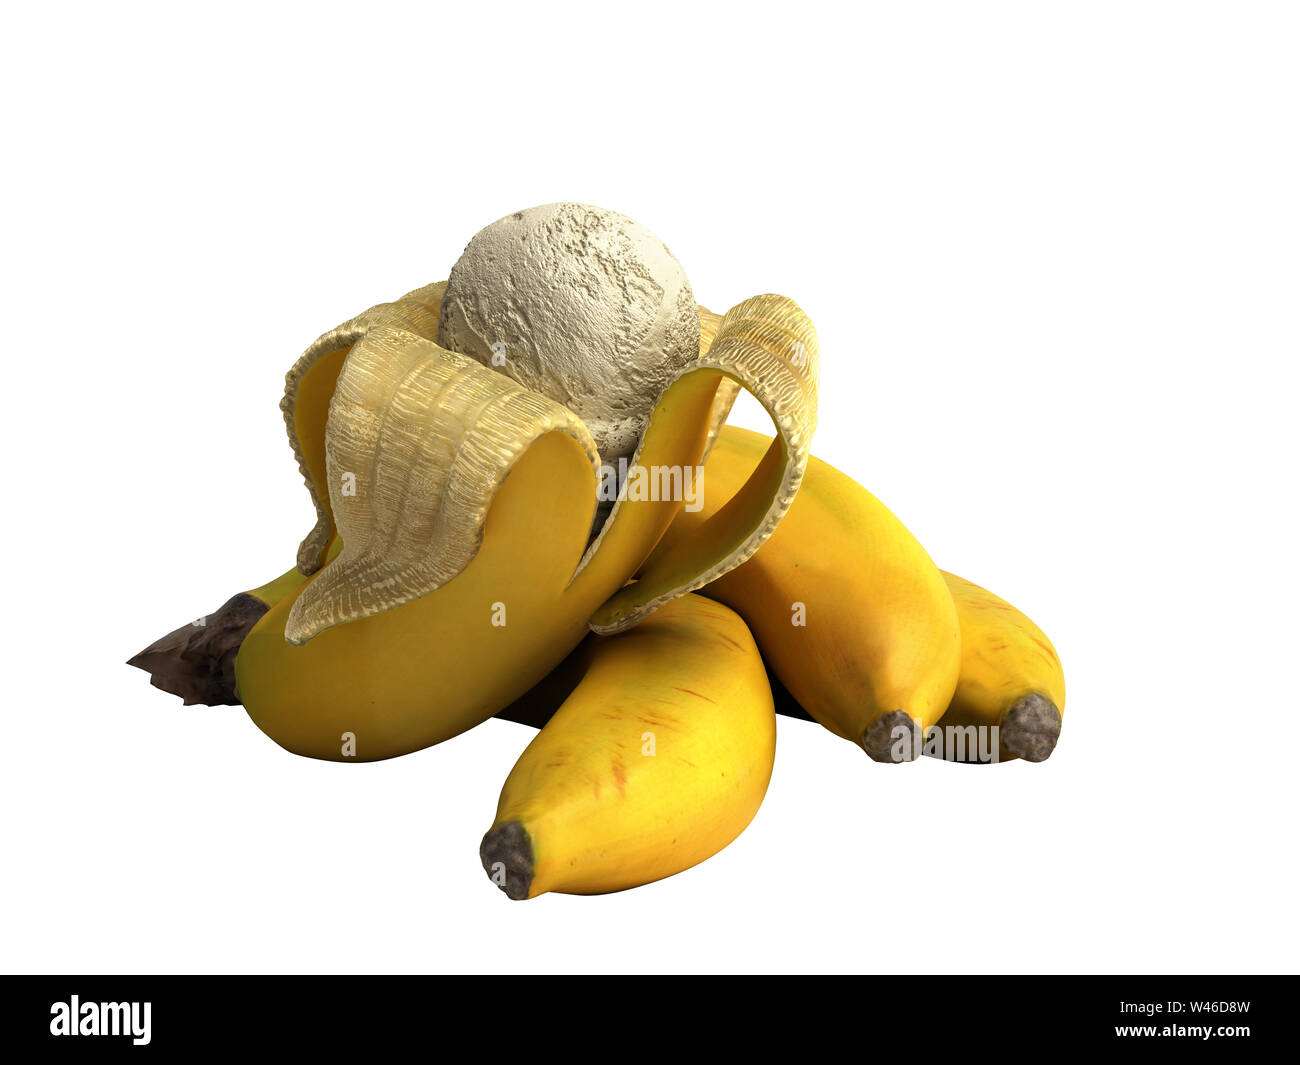 modern concept of fruit ice cream A Banana ice cream ball lies on a roasted Banana 3d render on white background no shadow Stock Photo